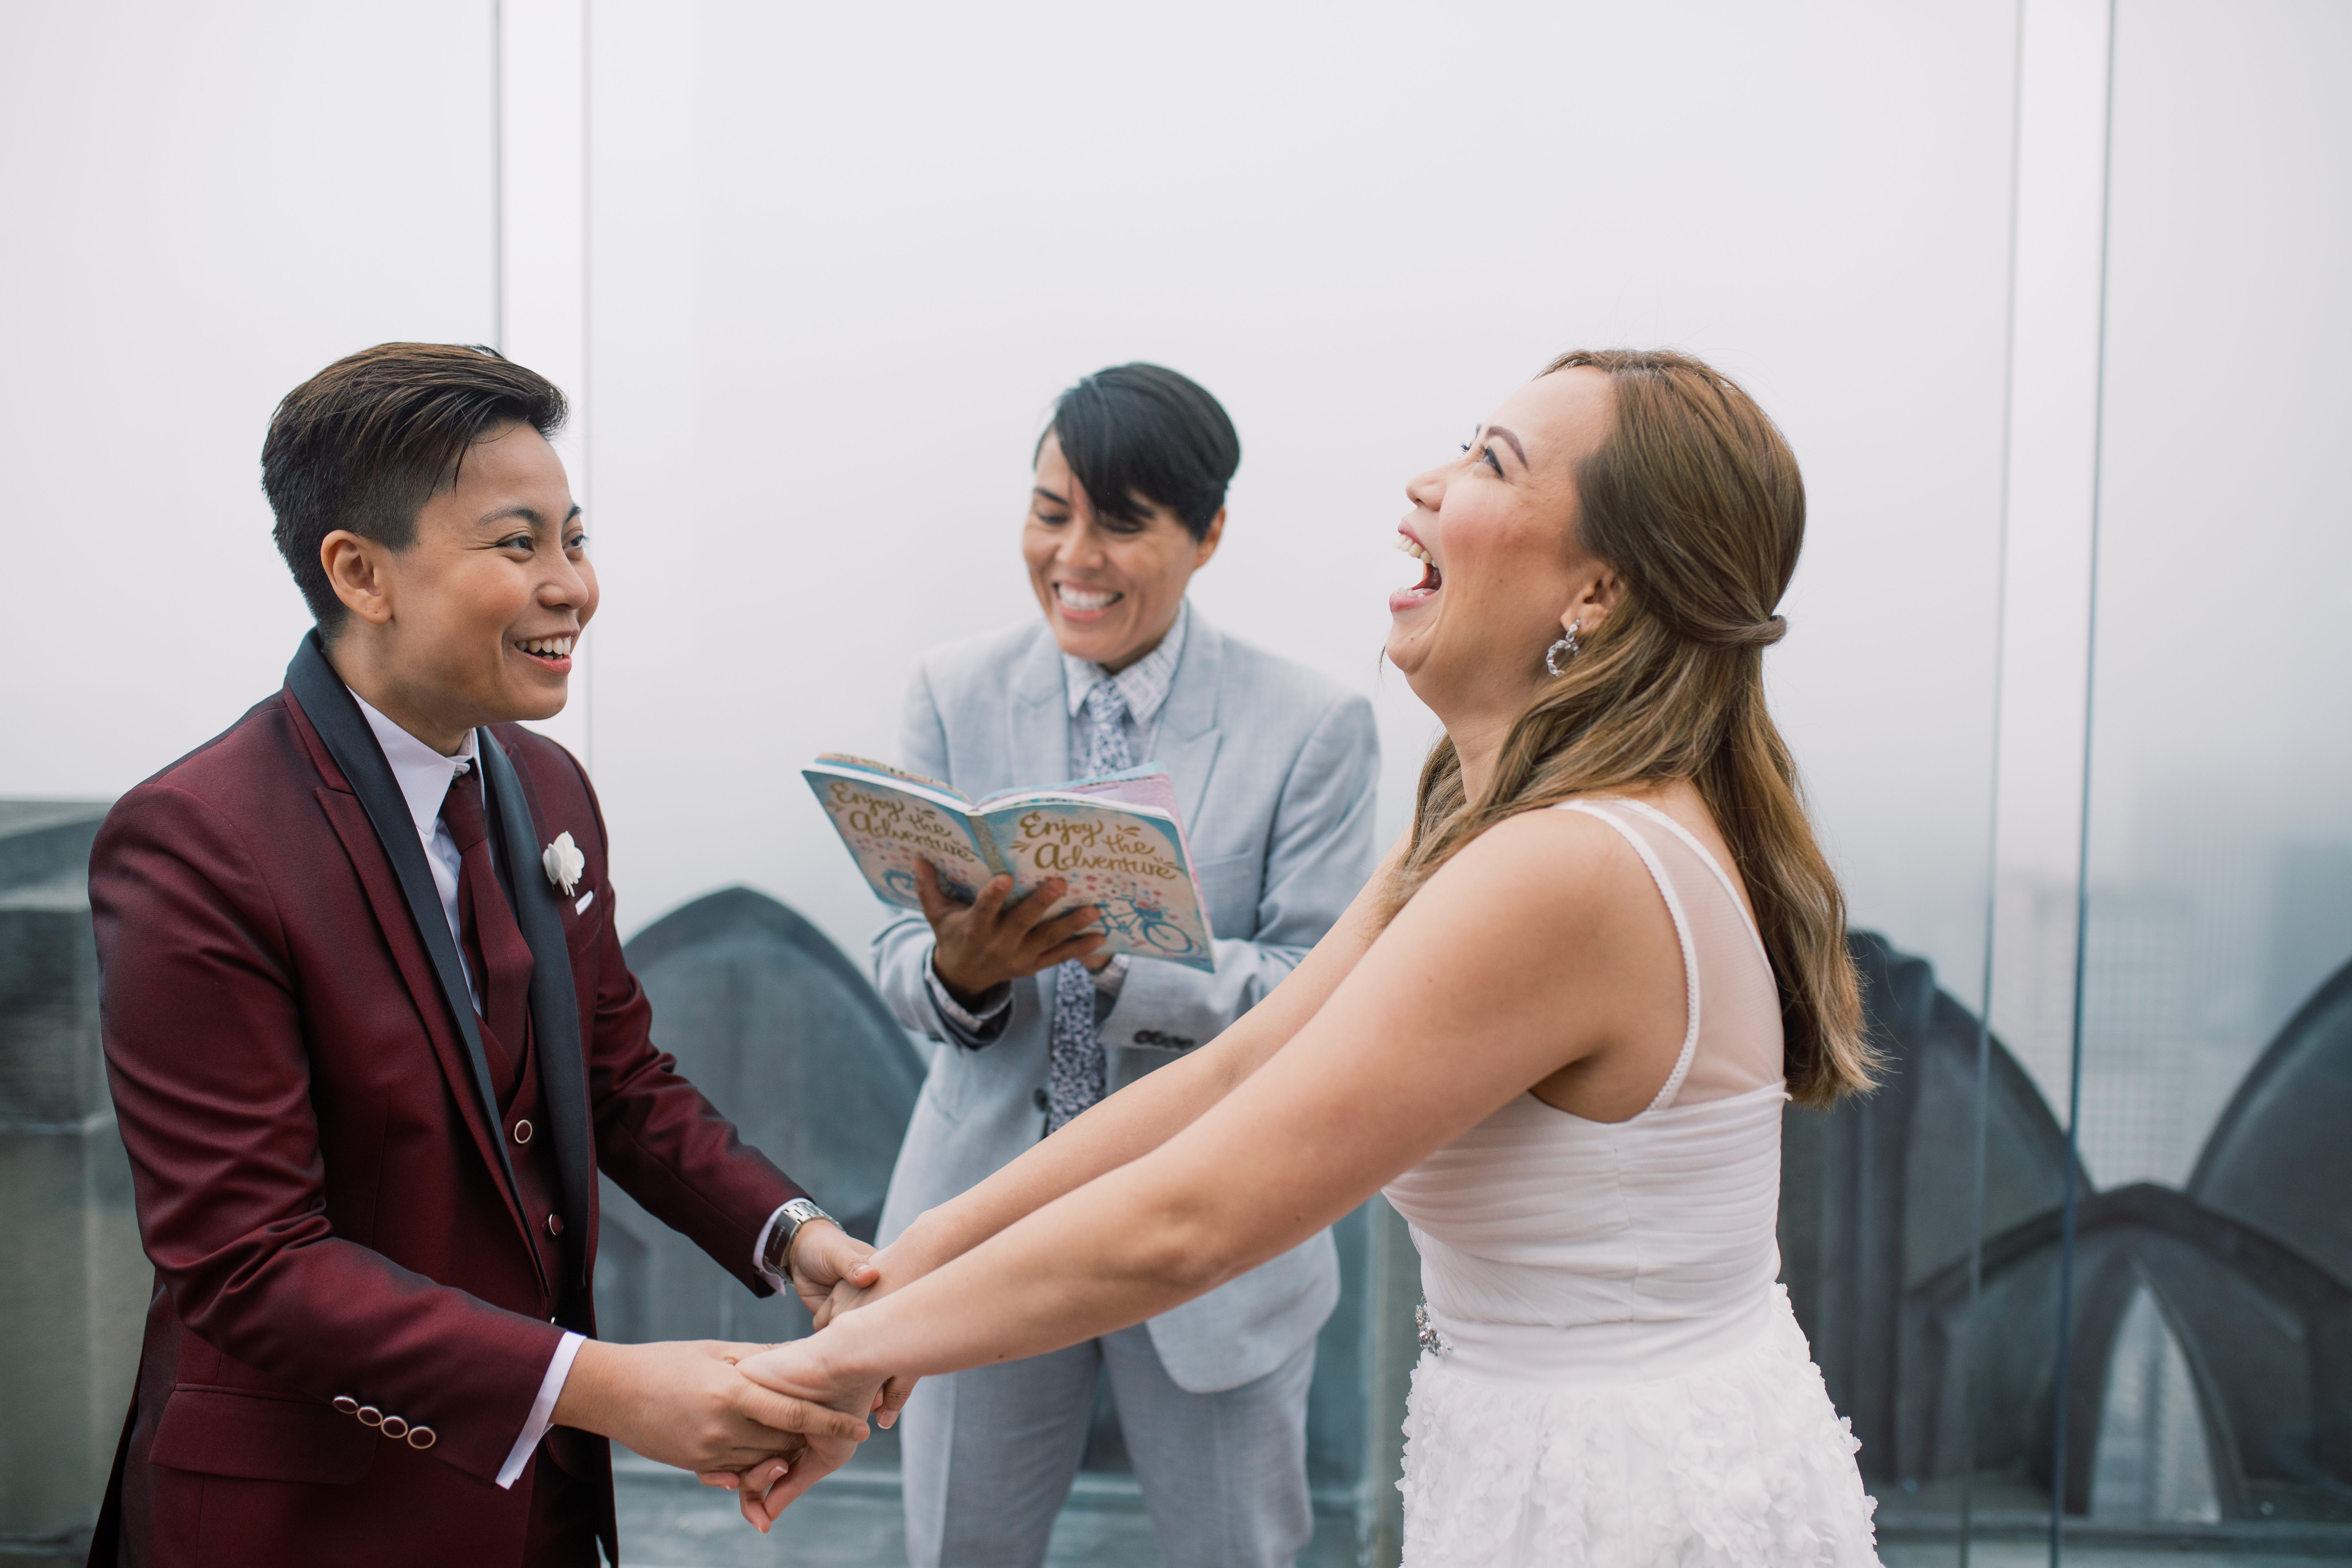 Romantic spring elopement at The Top of The Rock in New York City wine cranberry suit white dress New York City NYC two brides LGBTQ+ weddings lesbian gay wedding transcontinental destination vows